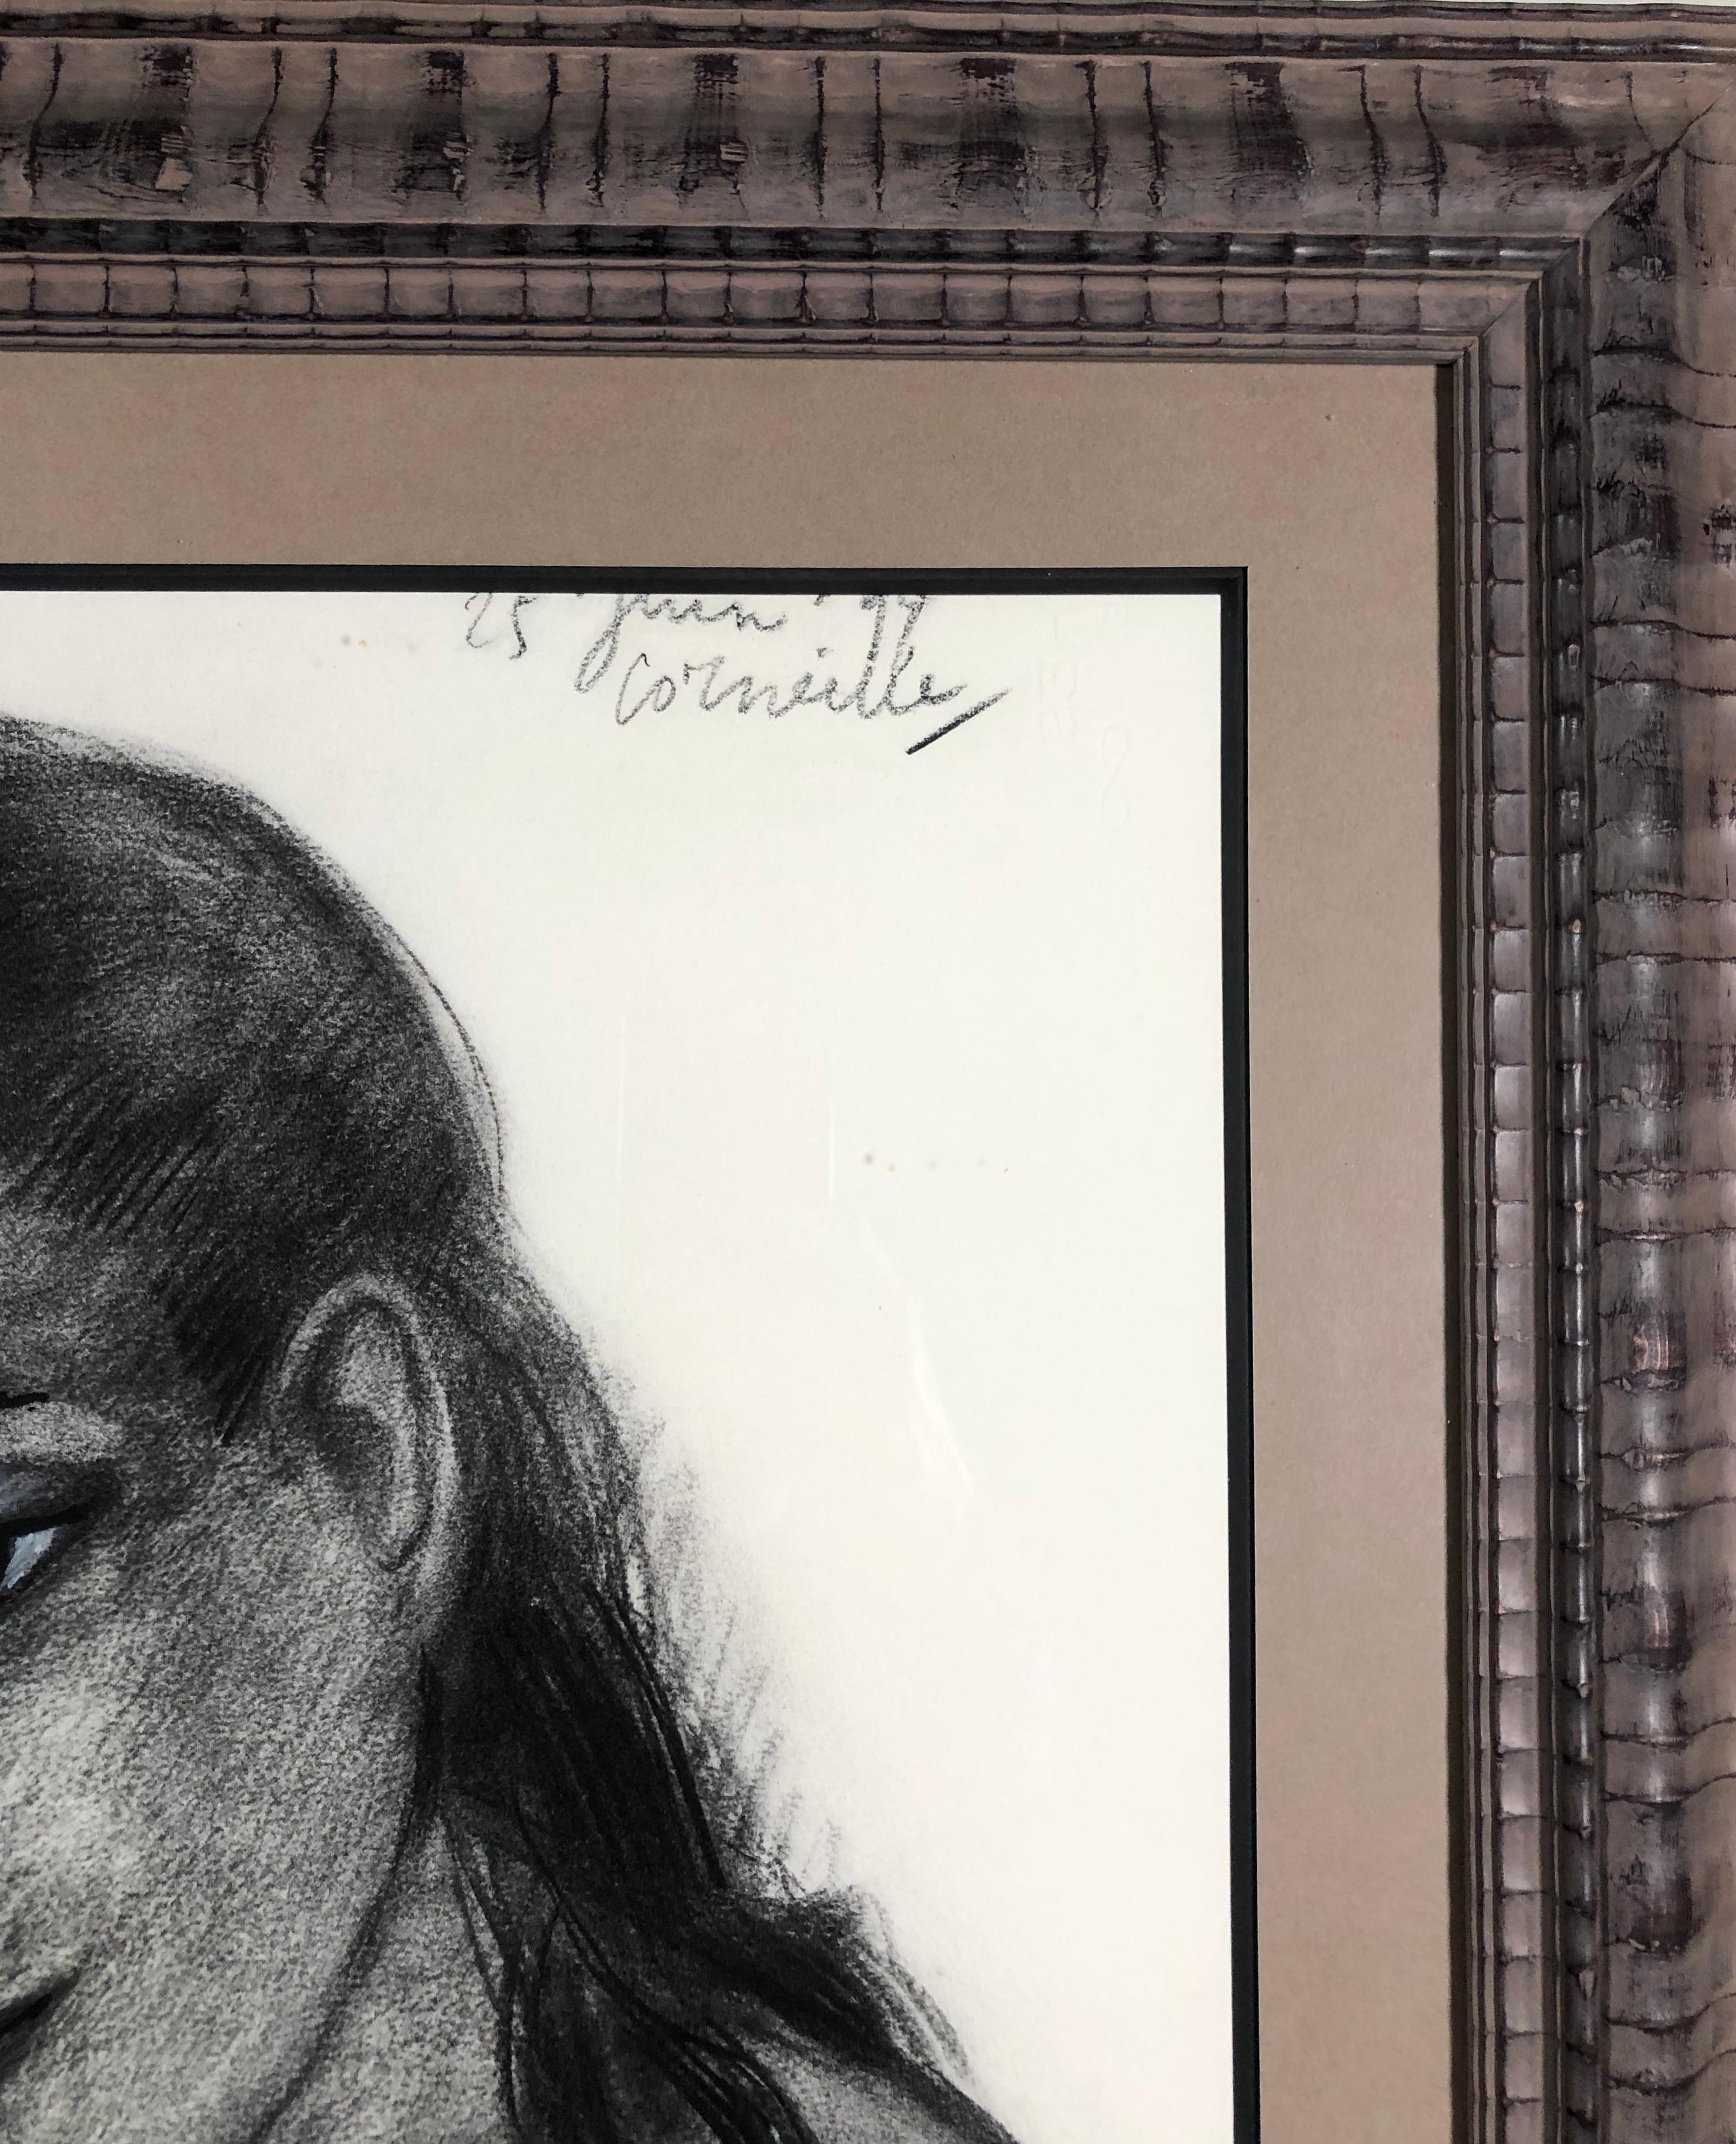 Portrait of a woman. Charcoal. Signed and dated '25th of June (19)99' - Art by Guillaume Cornelis van Beverloo (Corneille)